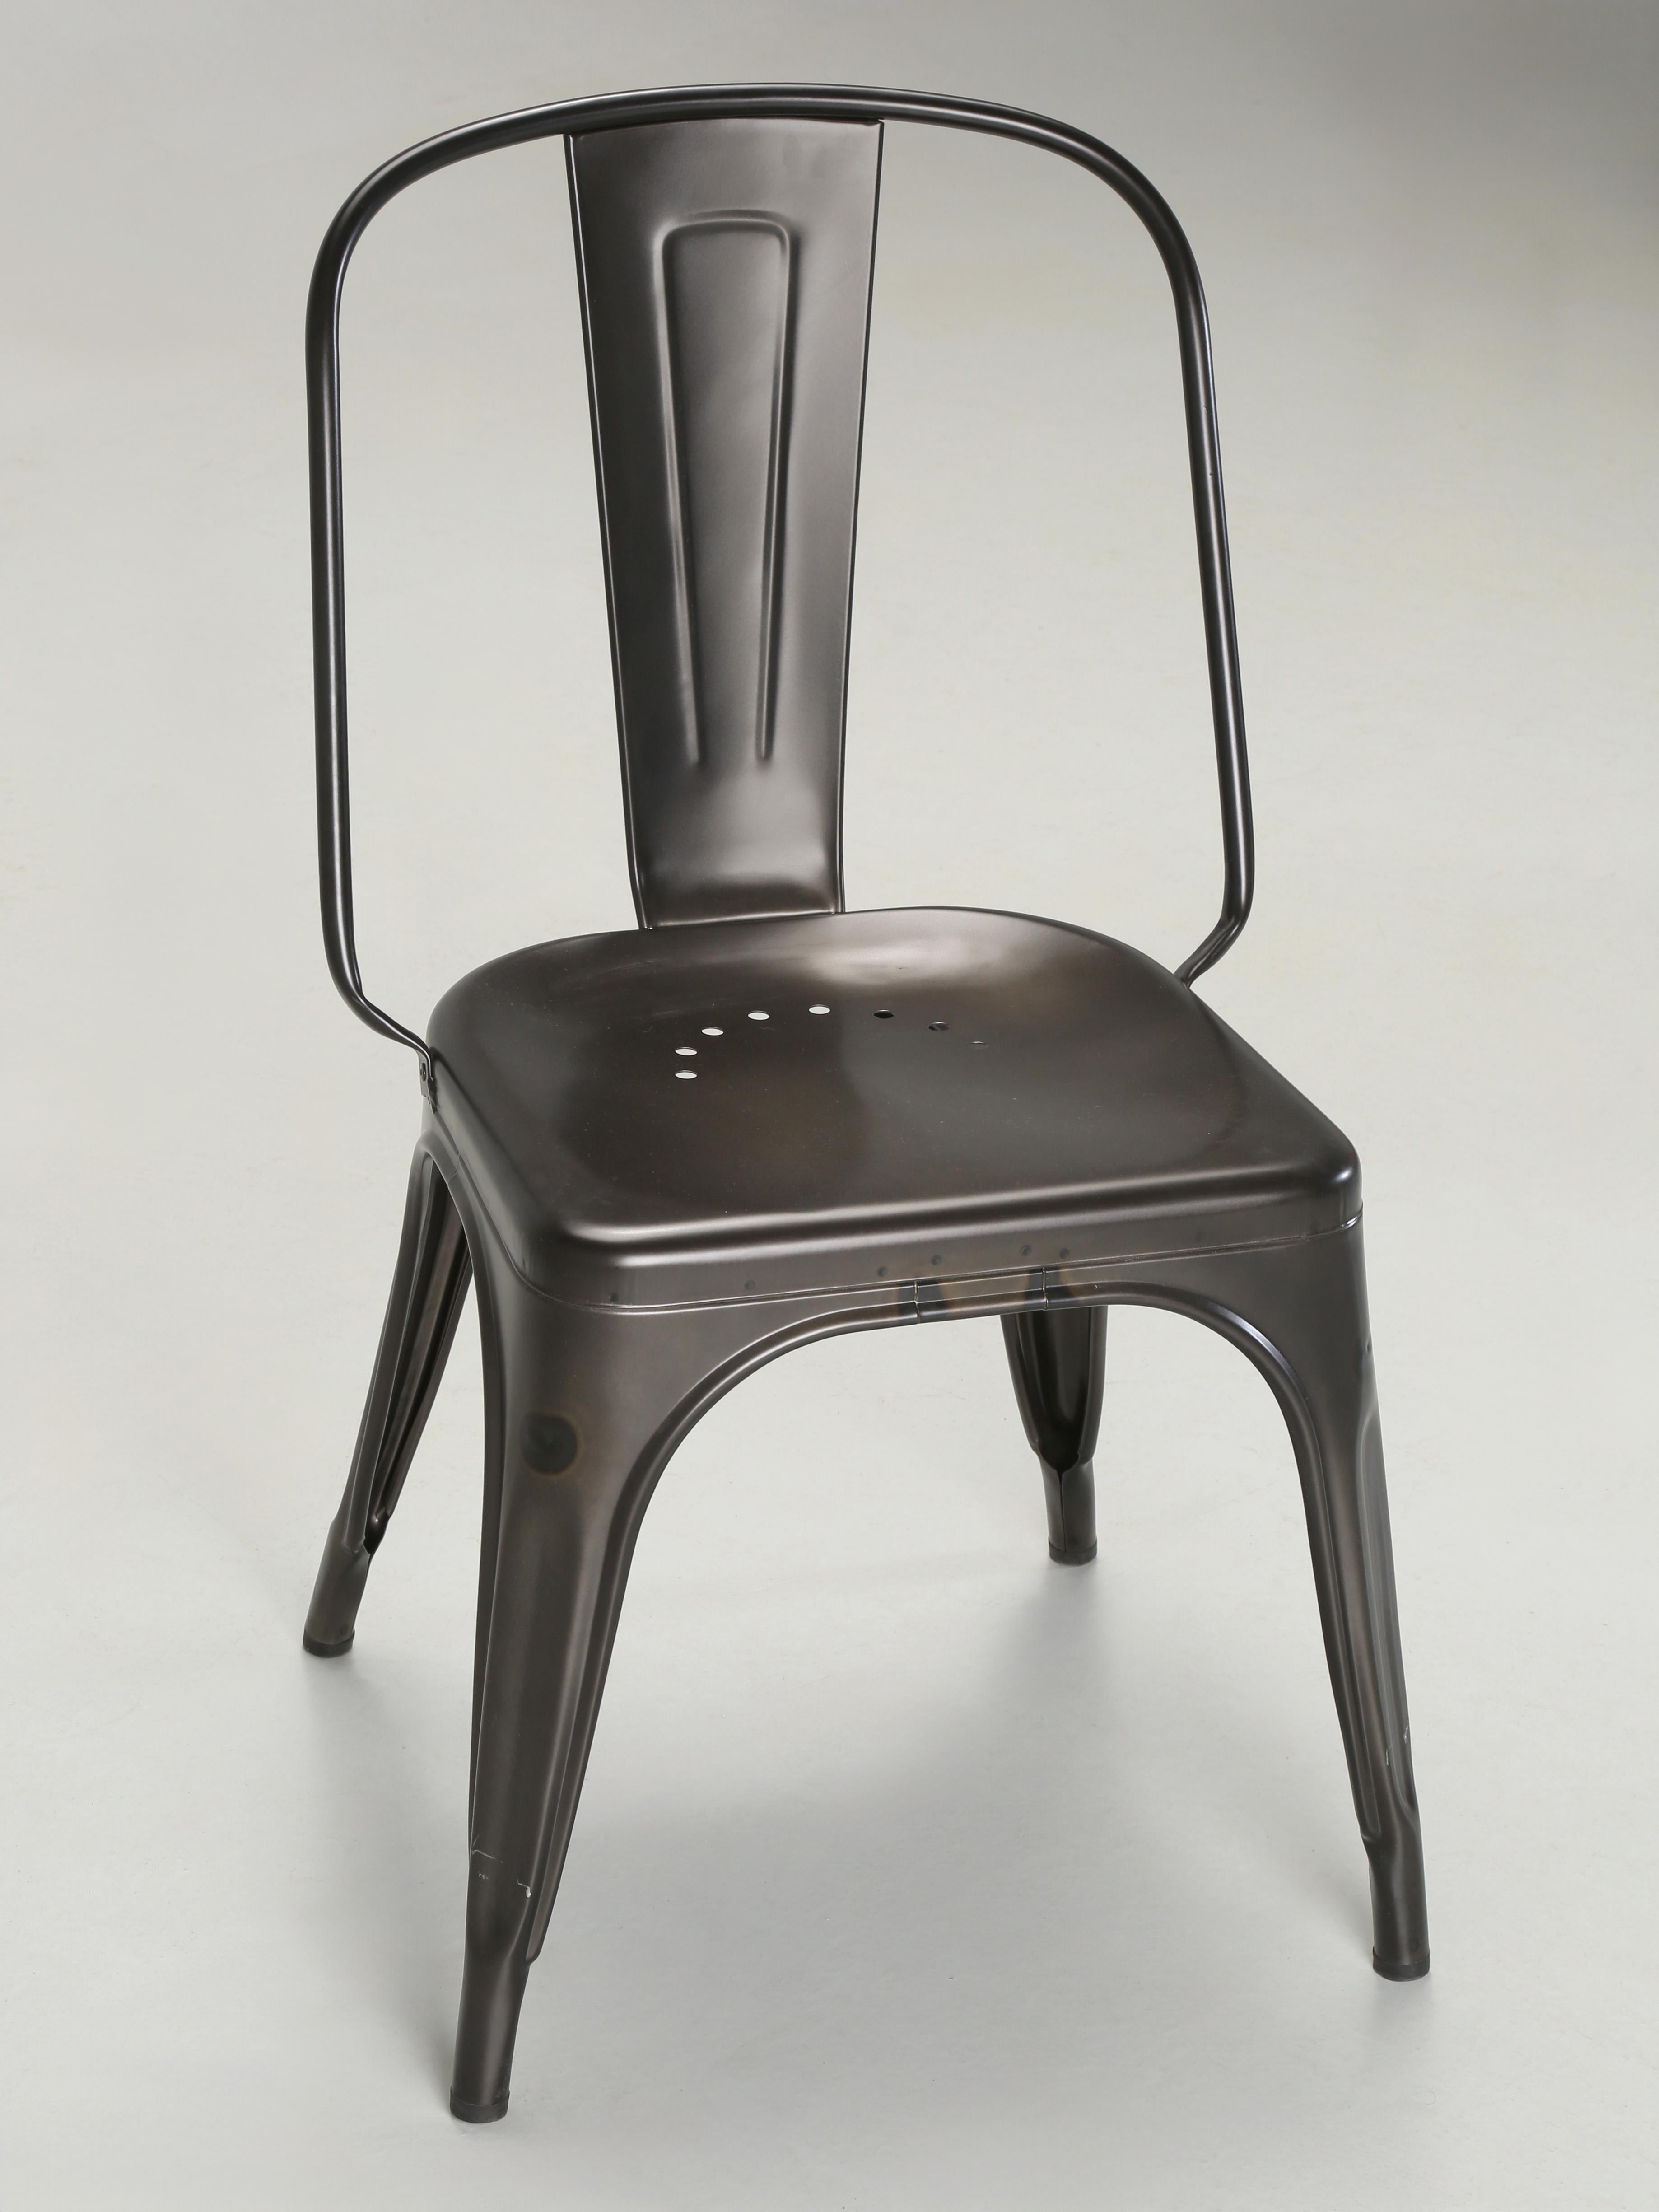 Tolix Steel Stacking Chairs hand-made in France and yes, these are genuine French made Tolix. We currently have over 1000 pieces of Tolix in stock and all are either vintage or new that have been warehoused for over 10-years. Even though these are